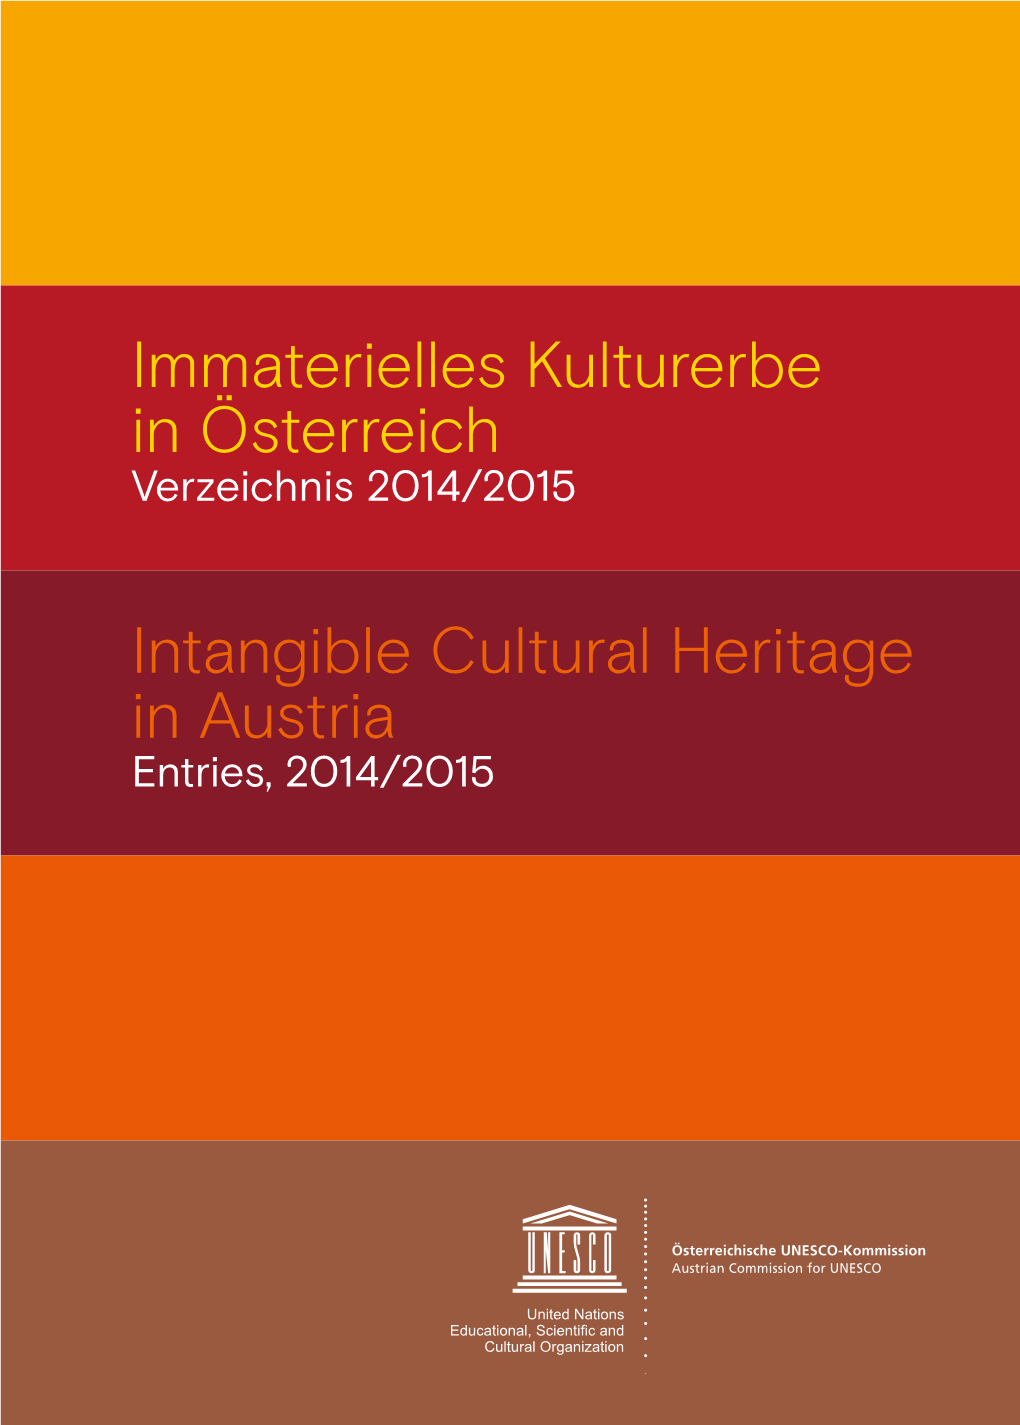 Immaterielles Kulturerbe in Österreich Intangible Cultural Heritage in Austria